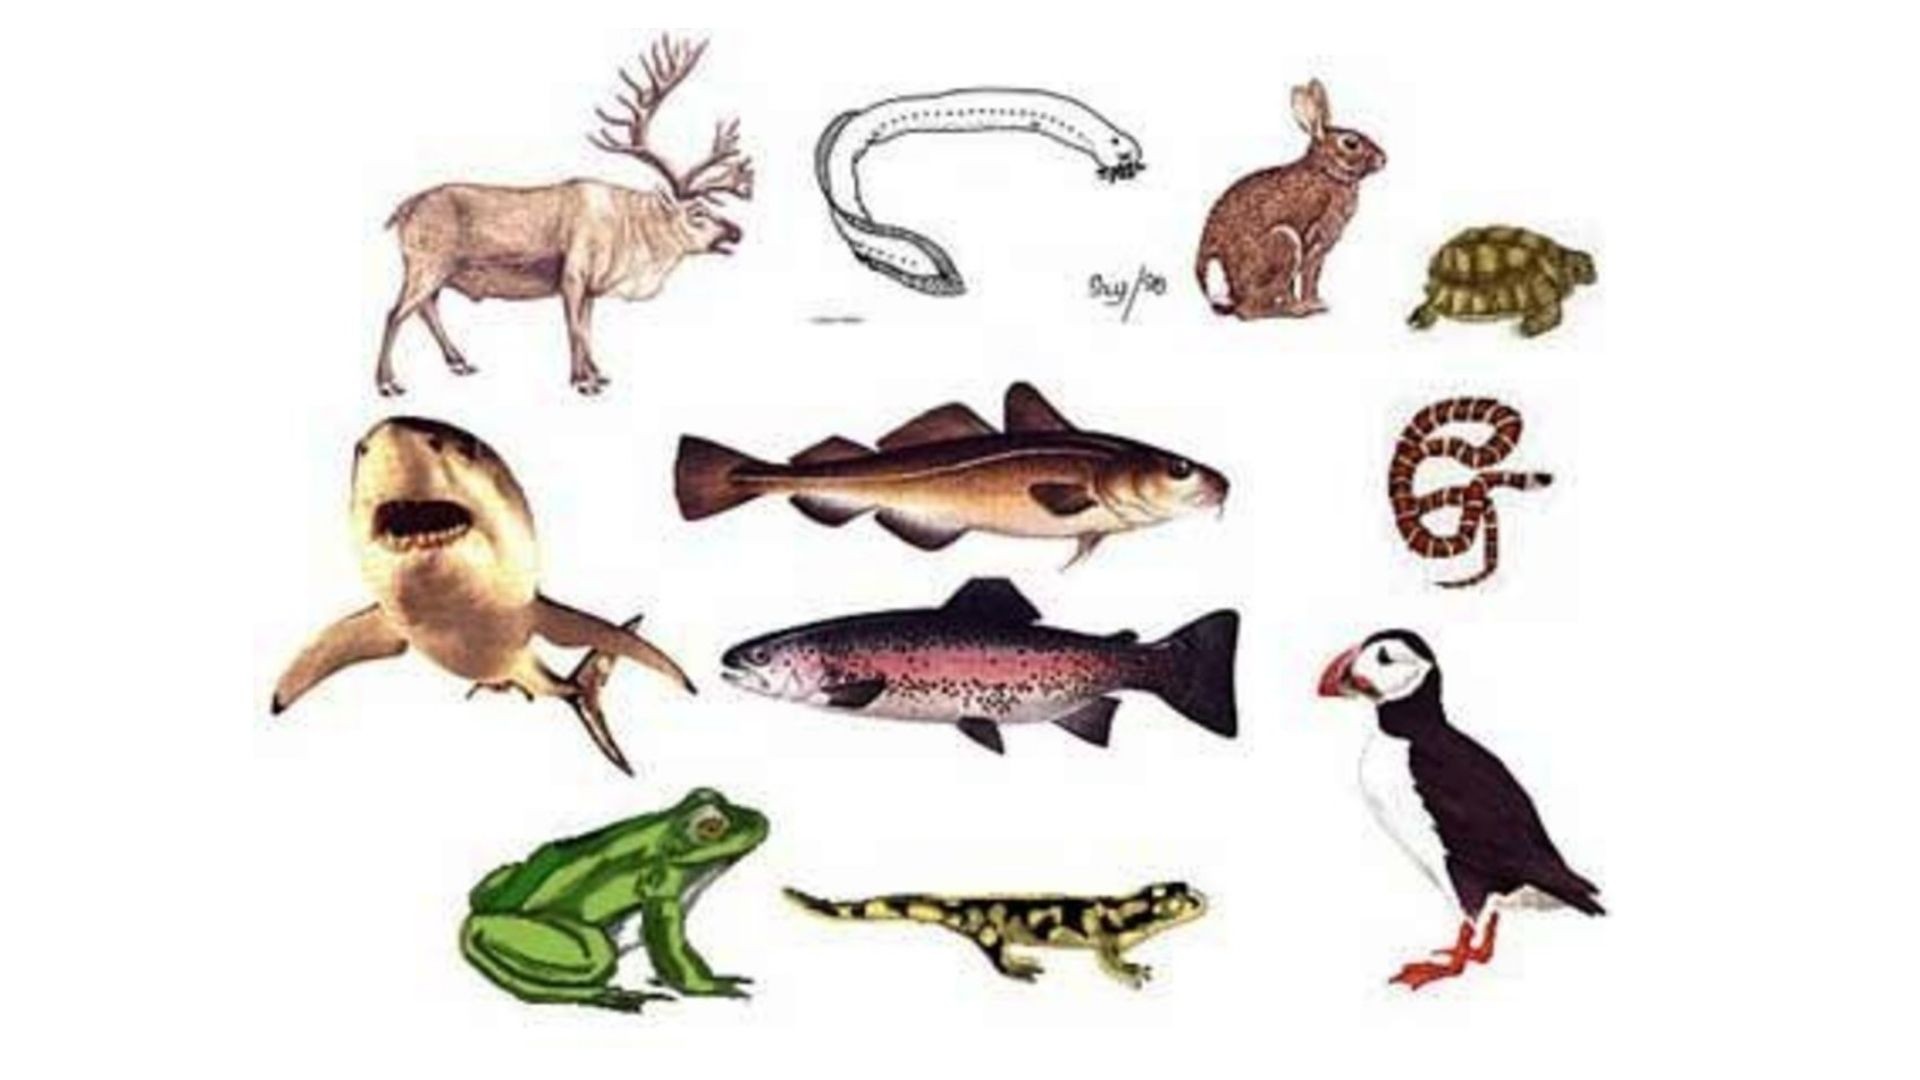 animals that belong to the classification Chordata